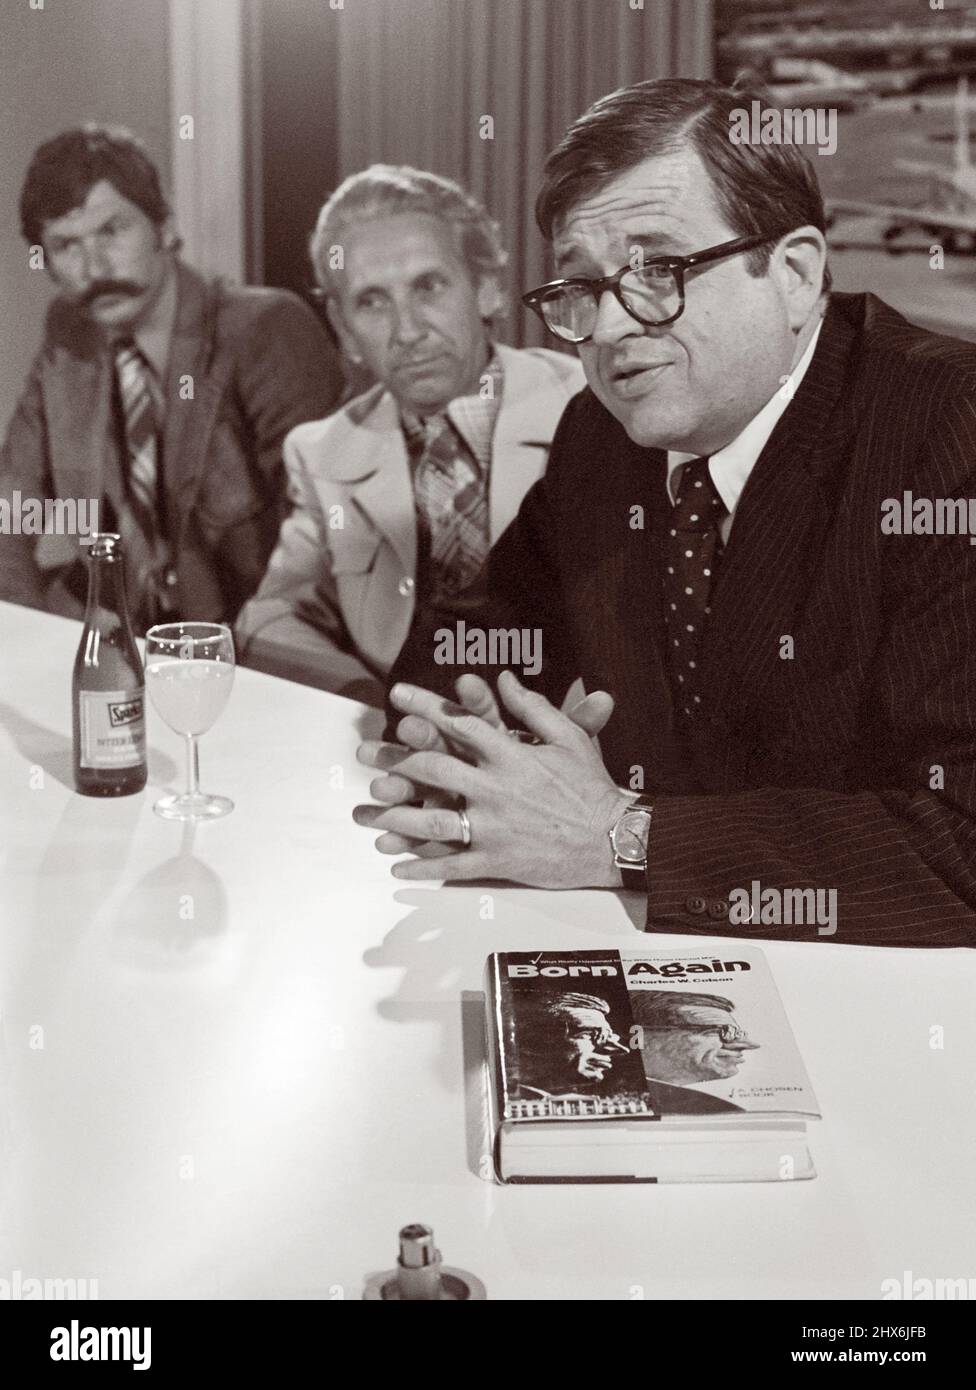 Charles 'Chuck' Colson (1931-2012) speaking at a press conference on June 13, 1976, at Amsterdam Airport Schiphol upon the publication of his autobiographical book, Born Again. Colson, a former political advisor to U.S. President Richard Nixon, was sentenced to prison for his role in the Watergate scandal. Before entering prison, Colson became an evangelical Christian and in 1976 founded Prison Fellowship, a Christian nonprofit ministry to prisoners. Stock Photo